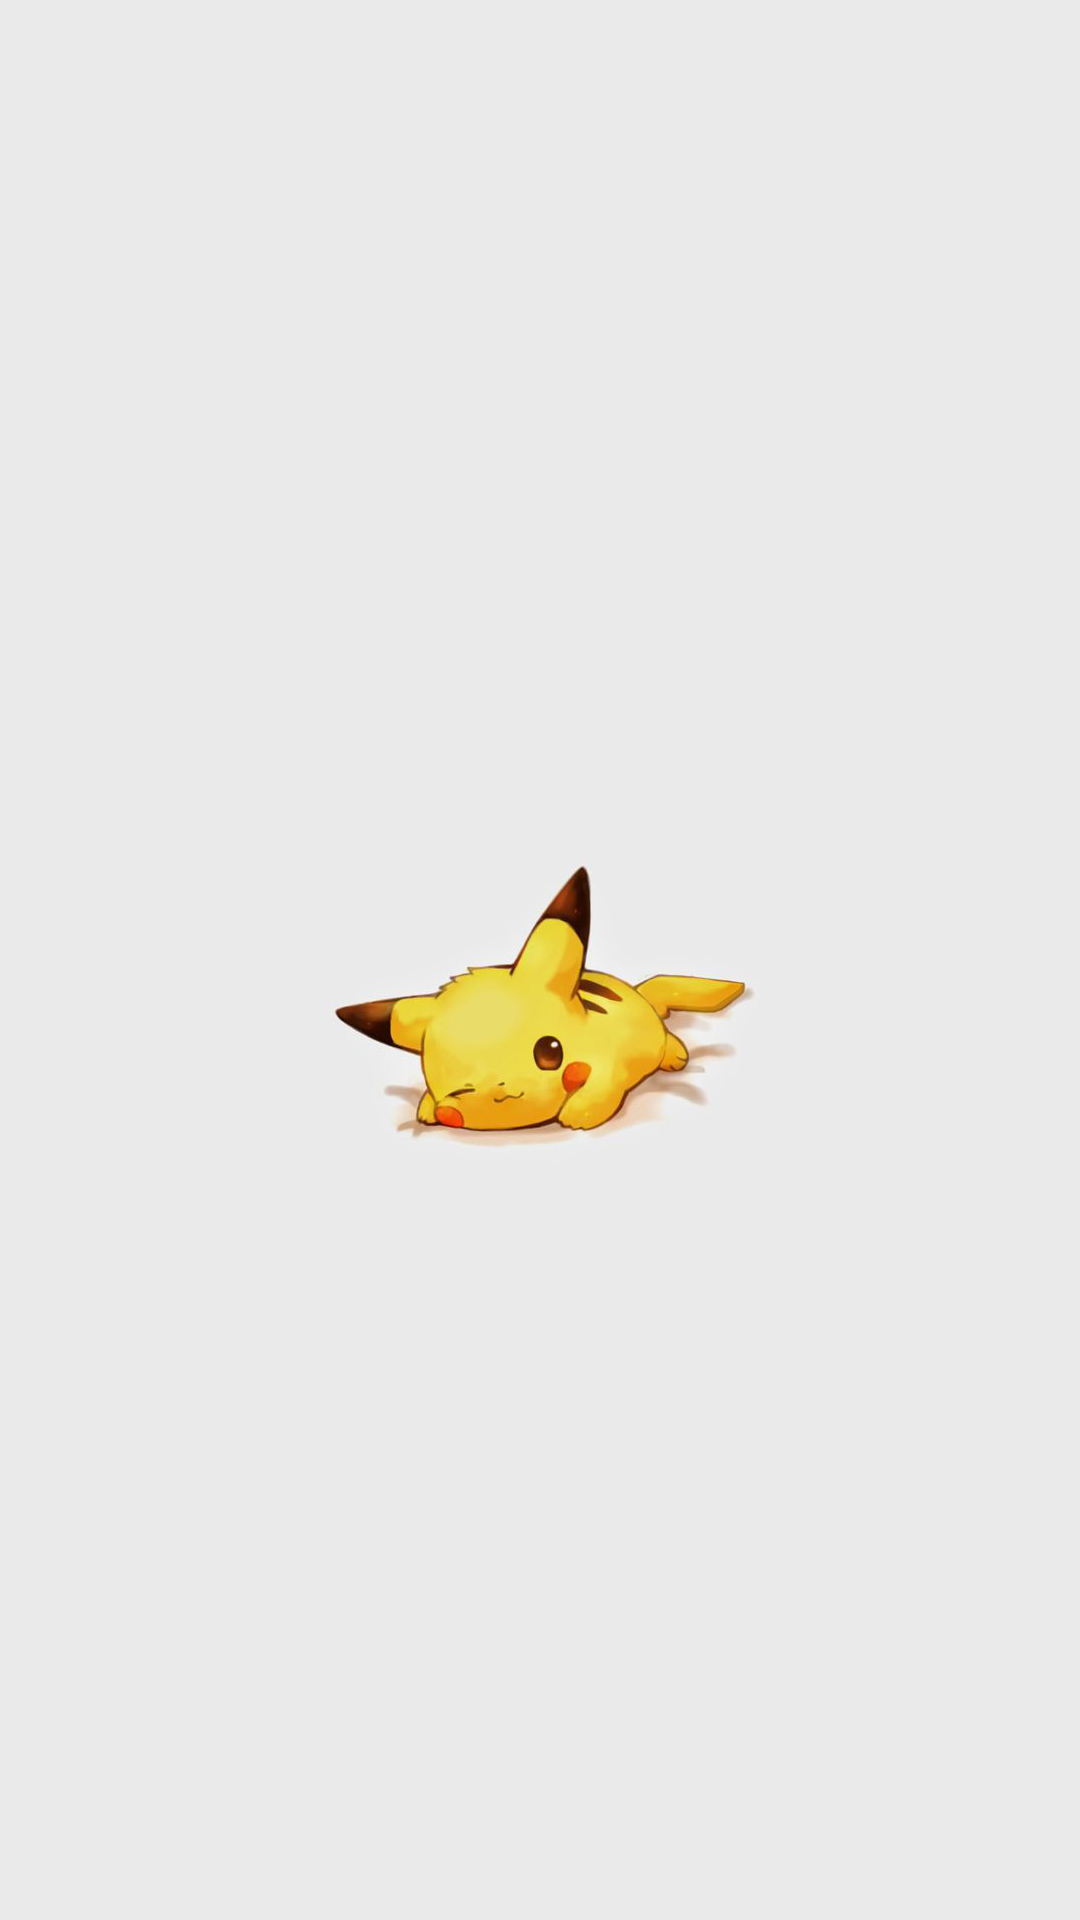 Pikachu For Iphone Wallpapers